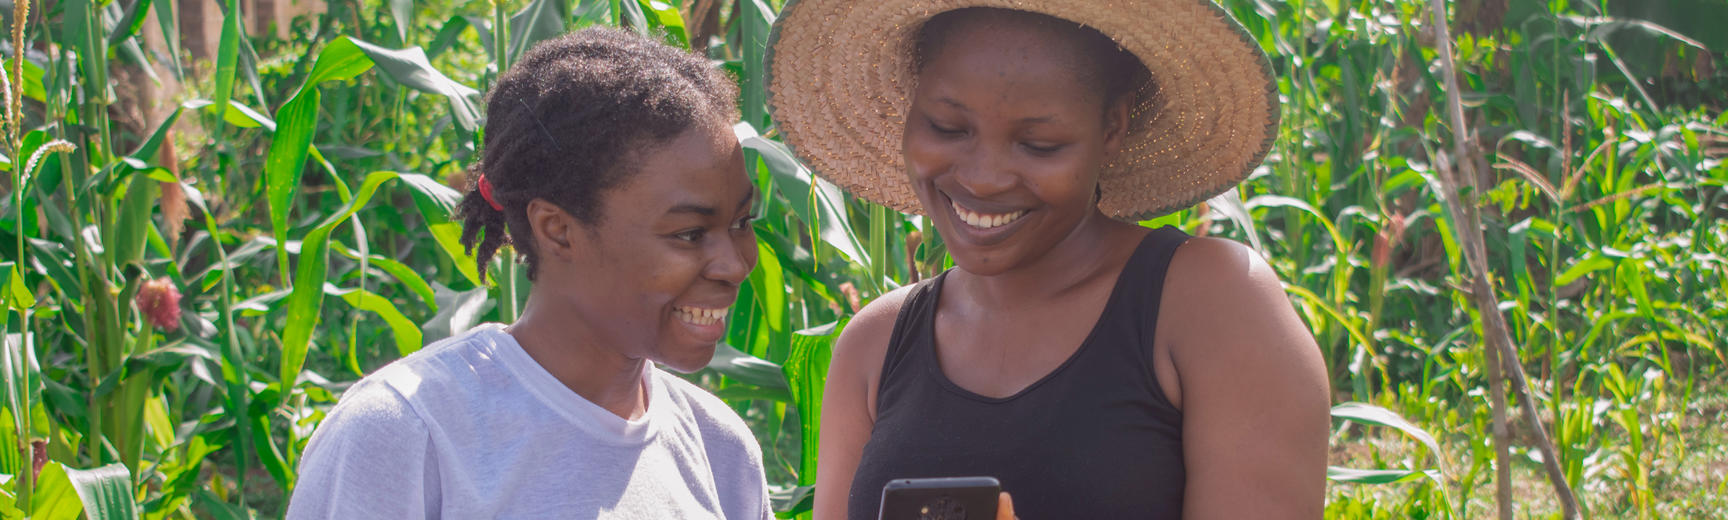 An African woman and teenager look at a phone together outdoors